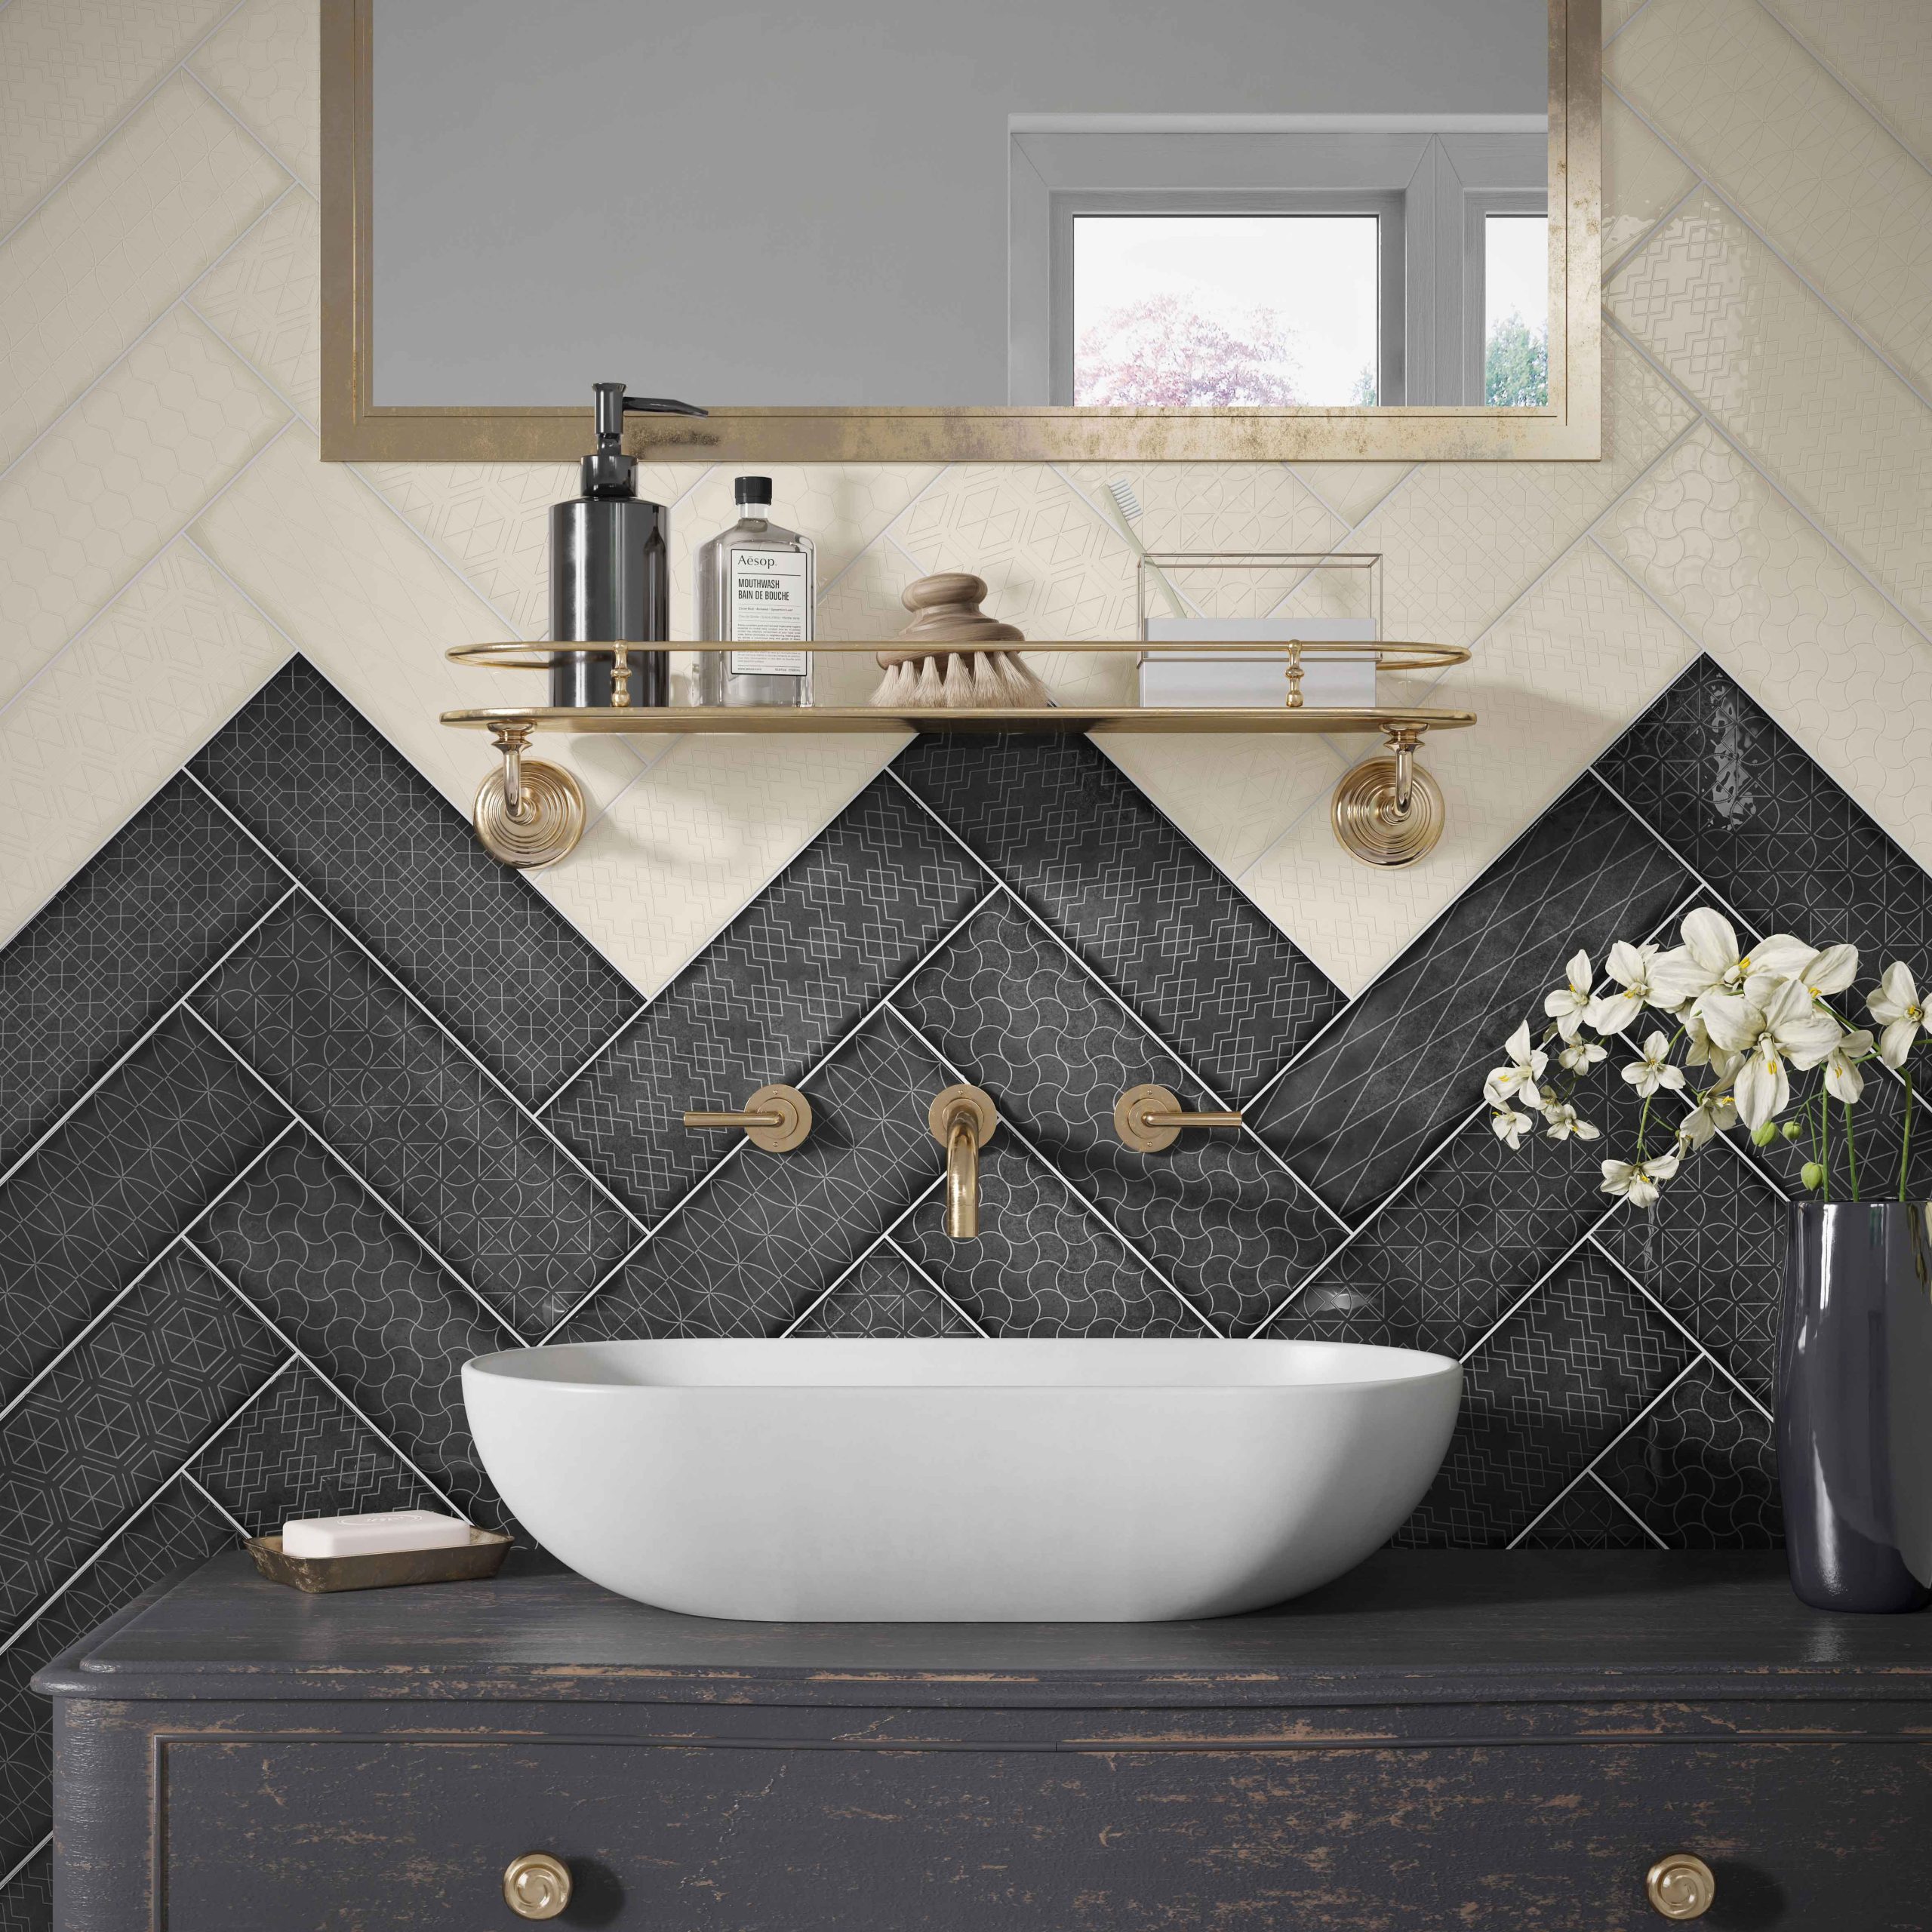 Nectar Ceramic Tile Collection Materials Wall | Creative